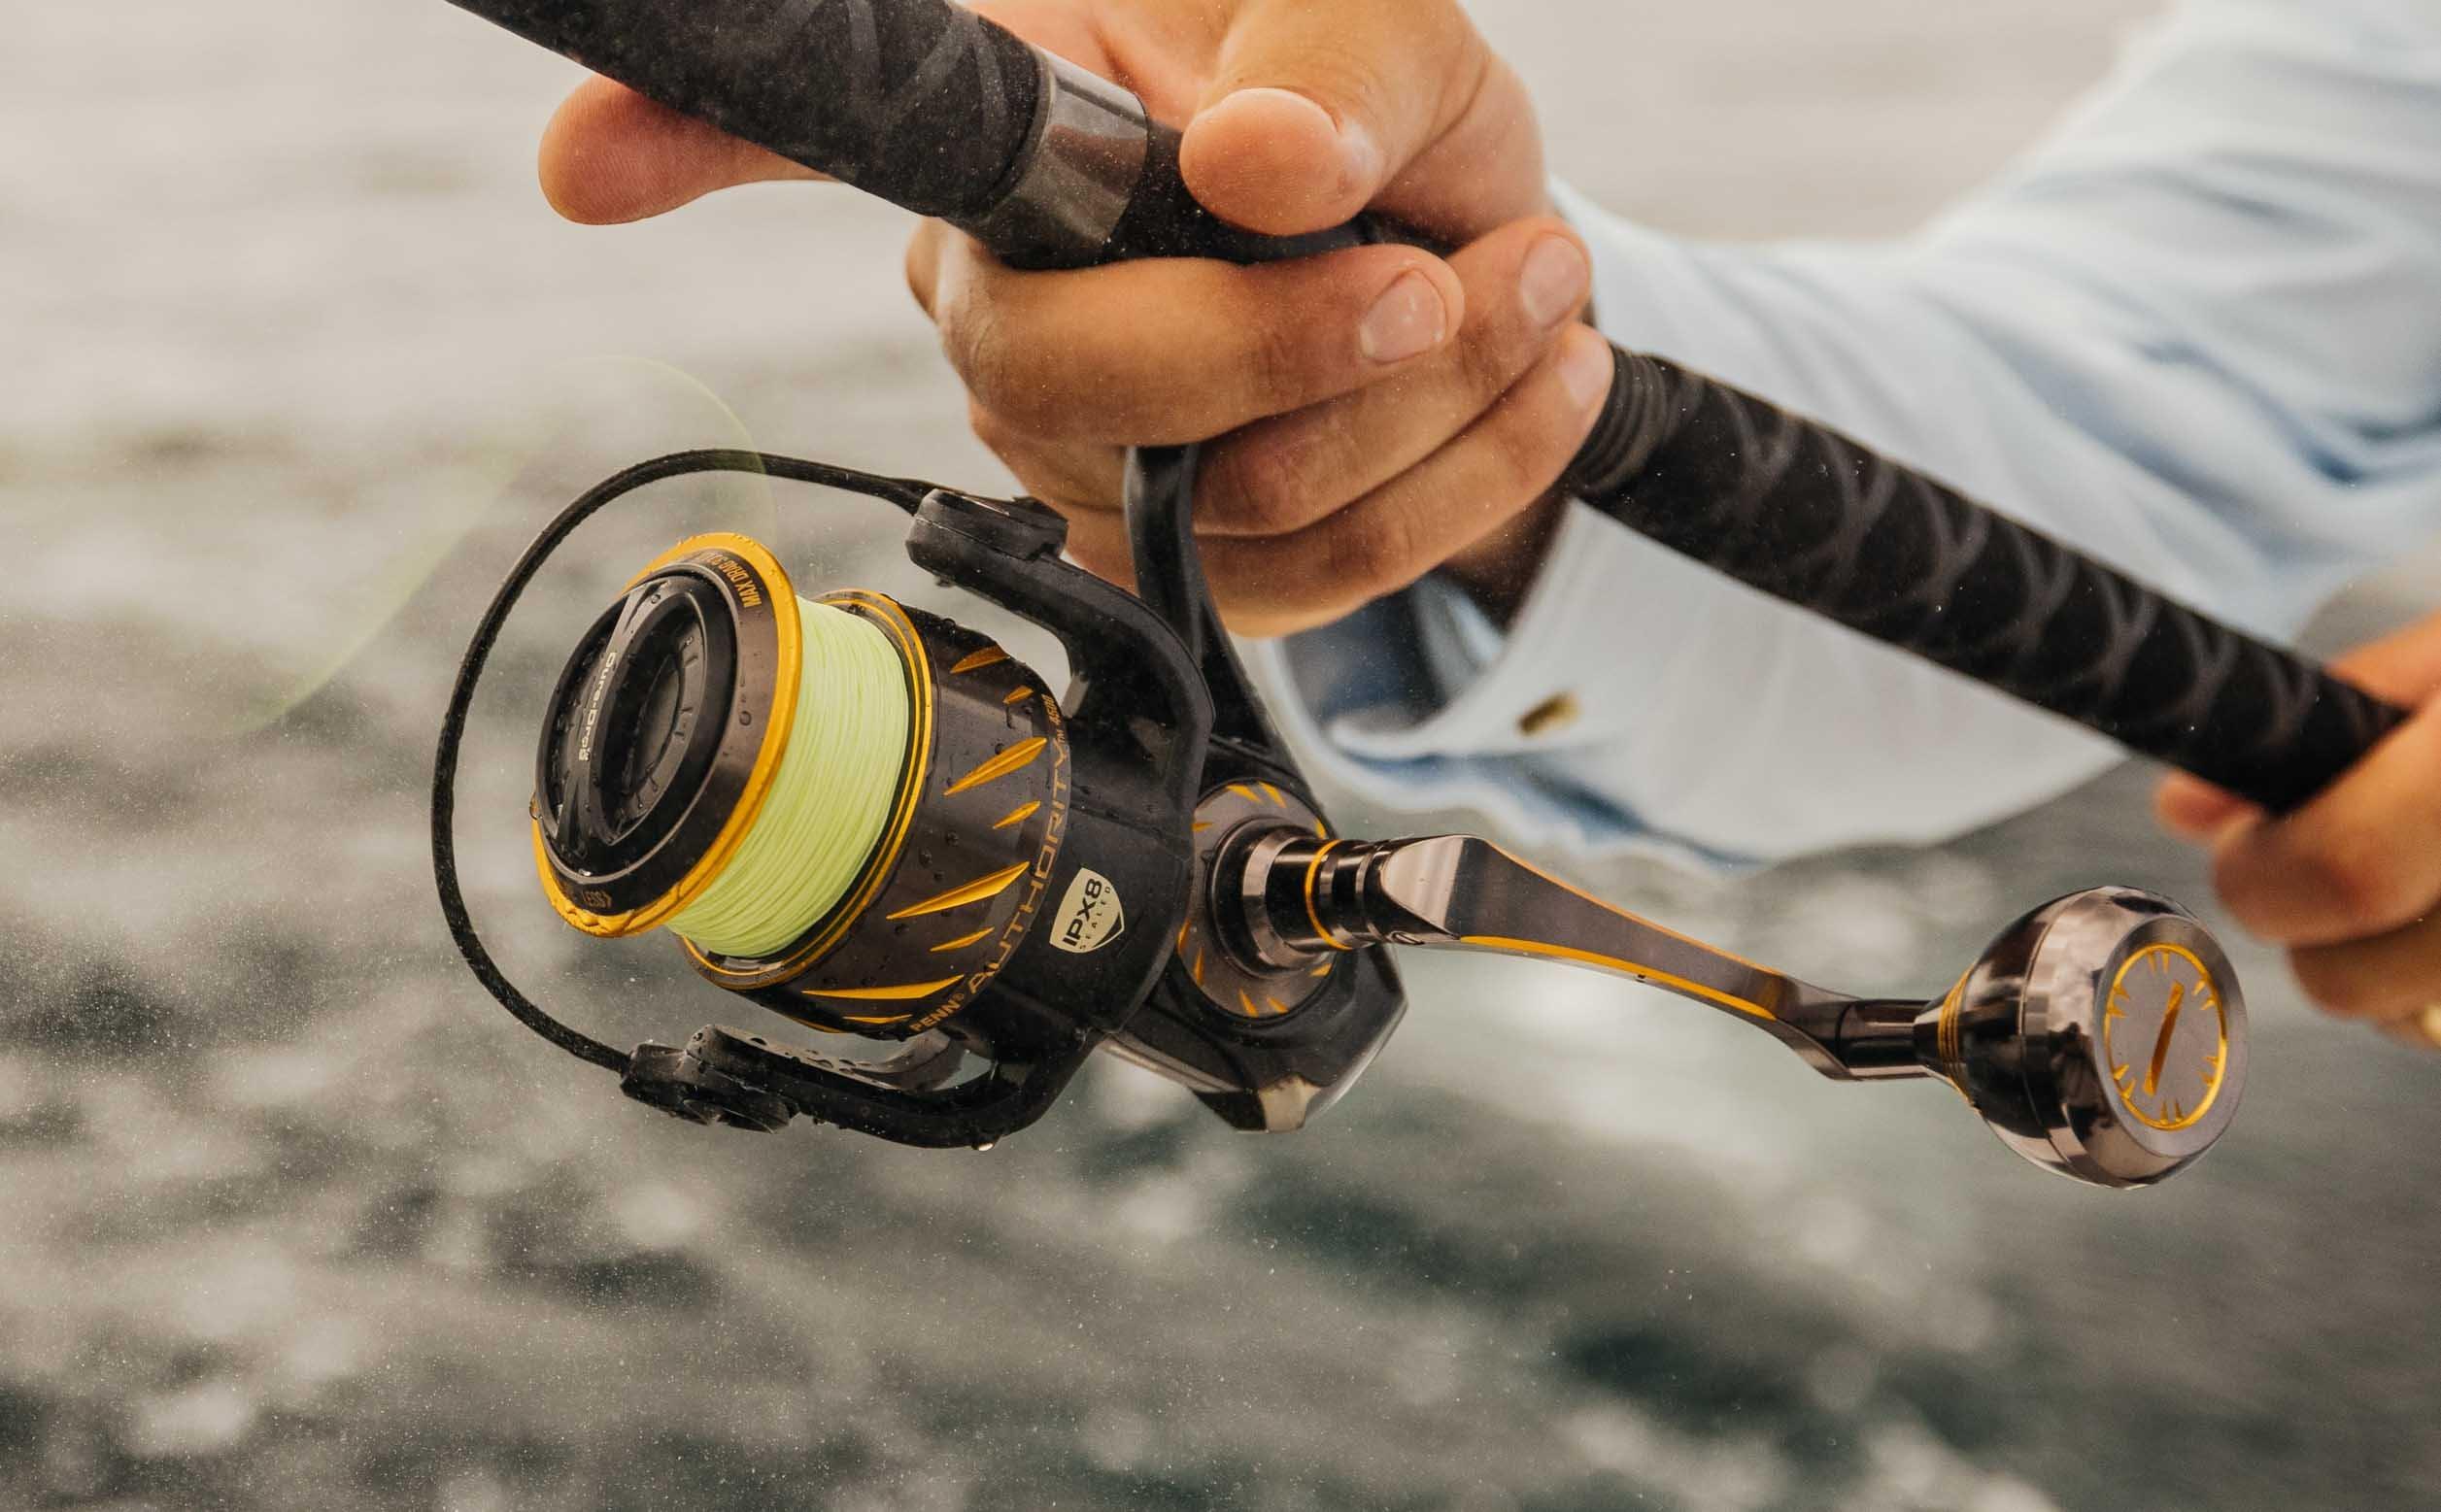 Fishing tackle from the world's most trusted fishing gear brands